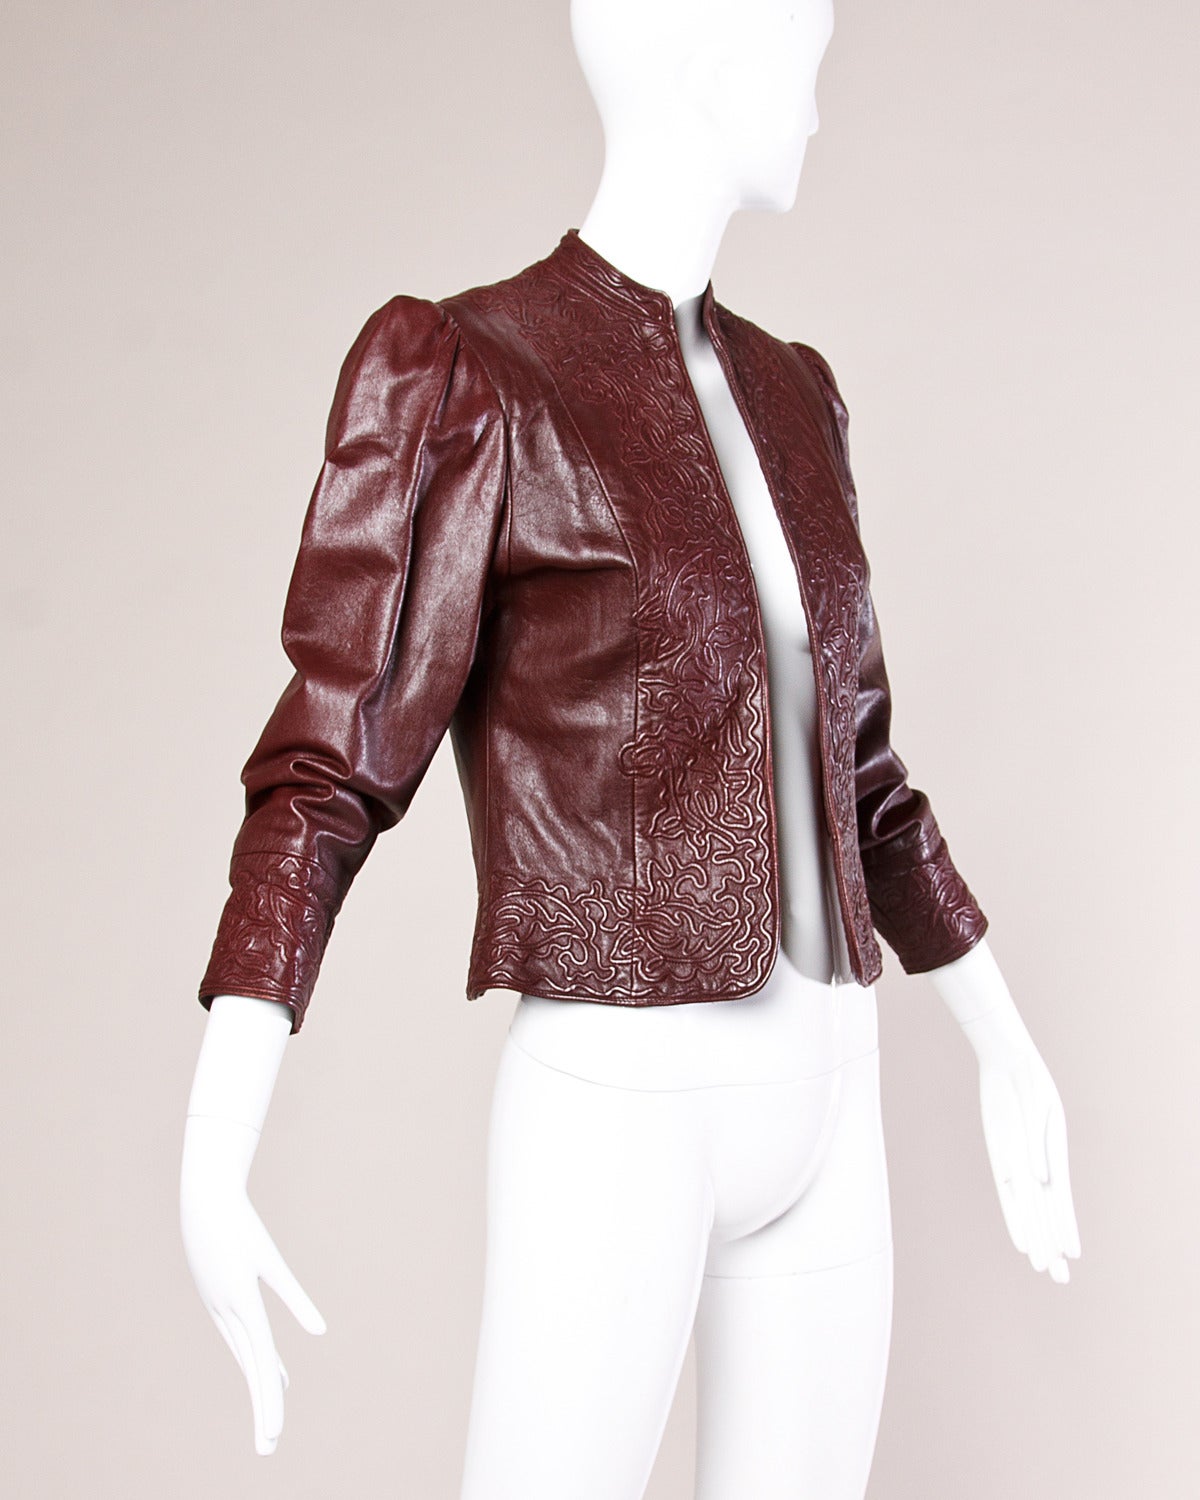 Gorgeous vintage burgundy leather jacket with a stitched embossed design. Sleek silhouette with full sleeves and gathered shoulders. Label has a hand written number tag.

Details:

Fully Lined
Structured Shoulder Pads Sewn Into Lining
No